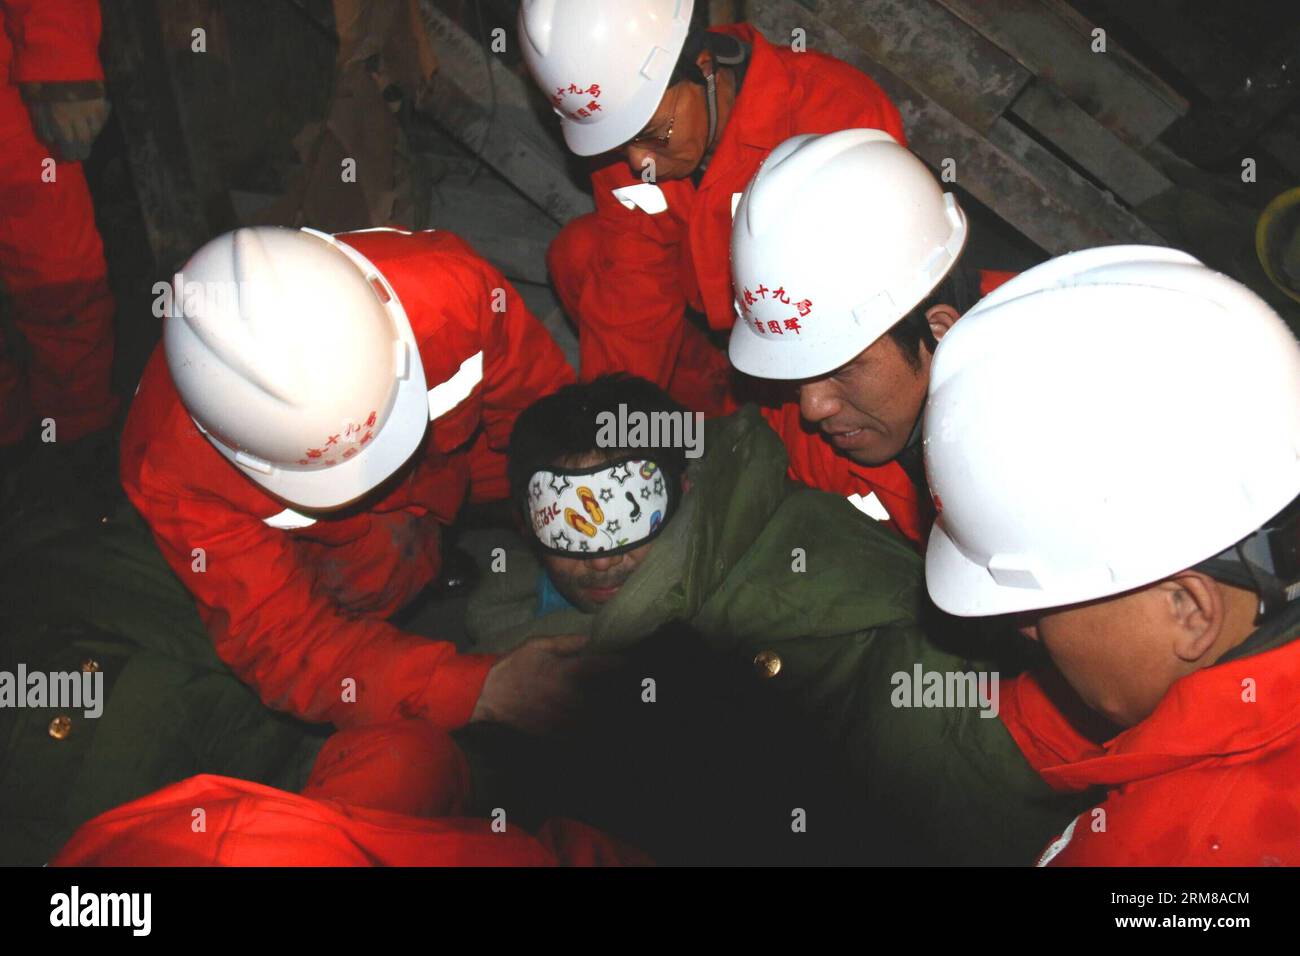 (140405) -- HUNCHUN, April 5, 2014 (Xinhua) -- Rescuers carry a trapped worker out of a collapsed railway tunnel in Hunchun, northeast China s Jilin Province, April 5, 2014. A tunnel of the Jilin-Hunchun High-Speed Railway, which is under construction, collapsed at around 2:00 a.m. Wednesday, leaving 12 workers trapped. All of the 12 workers have been rescued by 3:30 p.m. Saturday. (Xinhua/Lin Hong) (wjq) CHINA-JILIN-HUNCHUN-RAILWAY TUNNEL-COLLAPSE-RESCUE (CN) PUBLICATIONxNOTxINxCHN   Hunchun April 5 2014 XINHUA Rescue Carry a Trapped Worker out of a Collapsed Railway Tunnel in Hunchun Northea Stock Photo